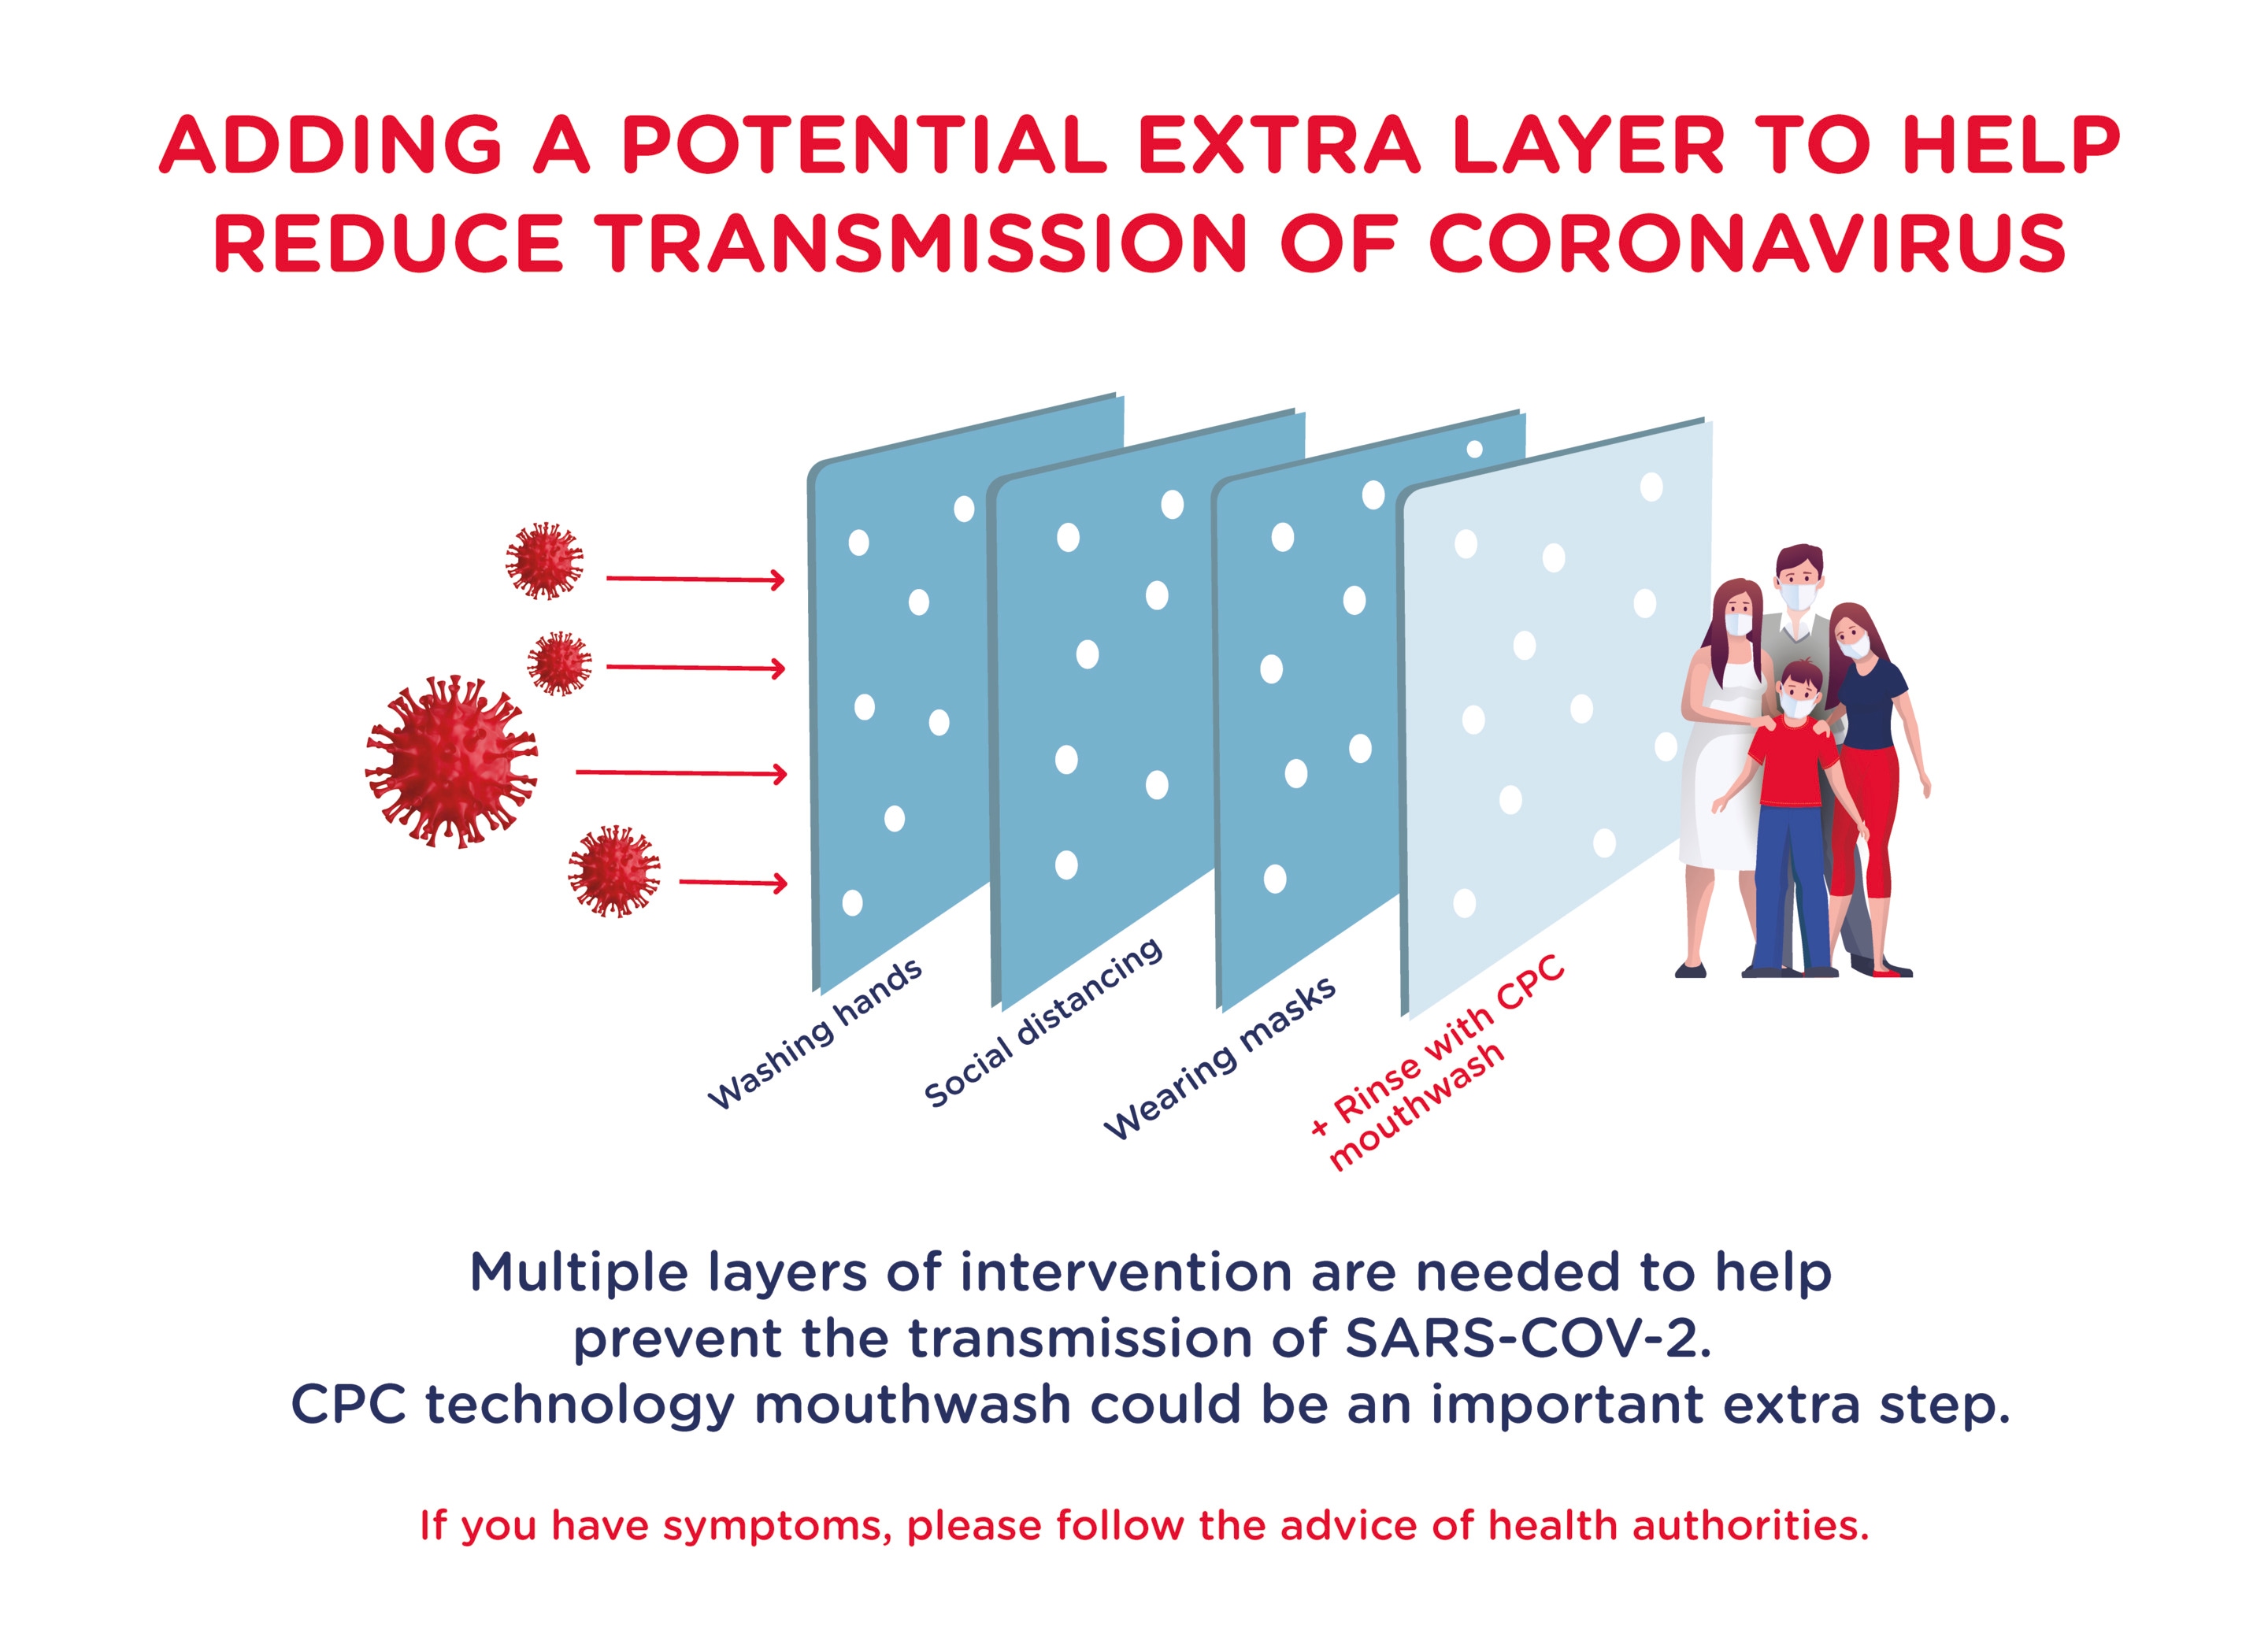 Adding a potential extra layer to help reduce transmission of coronavirus